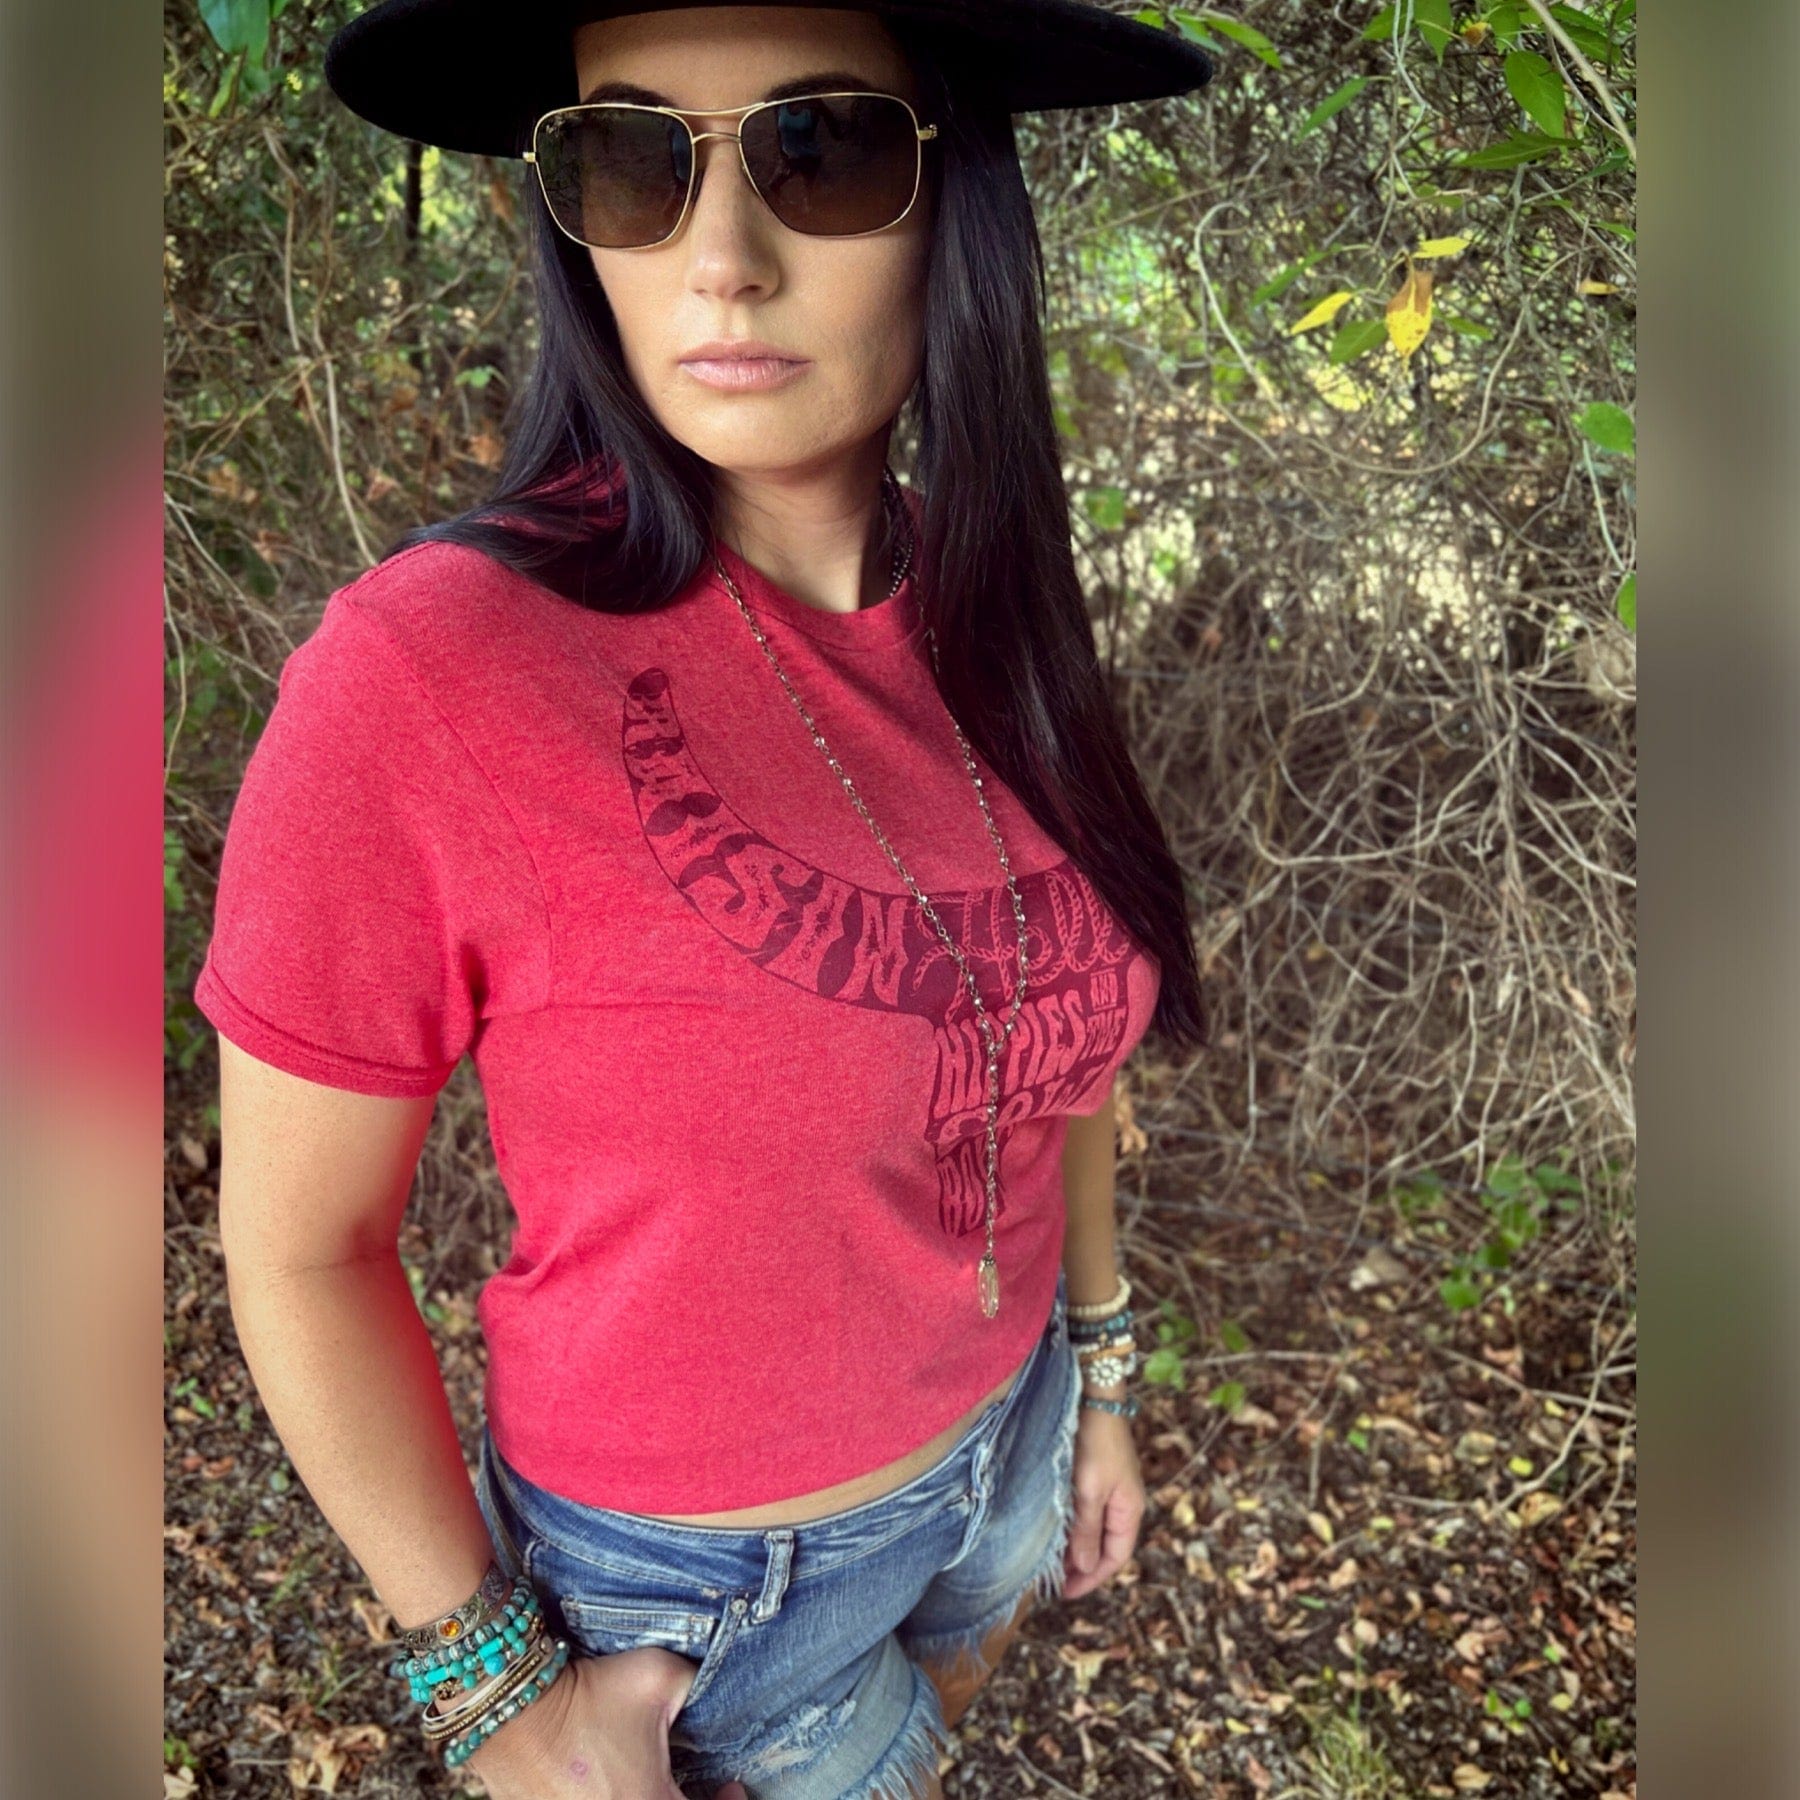 Envy Stylz Boutique Women - Apparel - Shirts - T-Shirts Hippies & Cowboys Graphic Tee